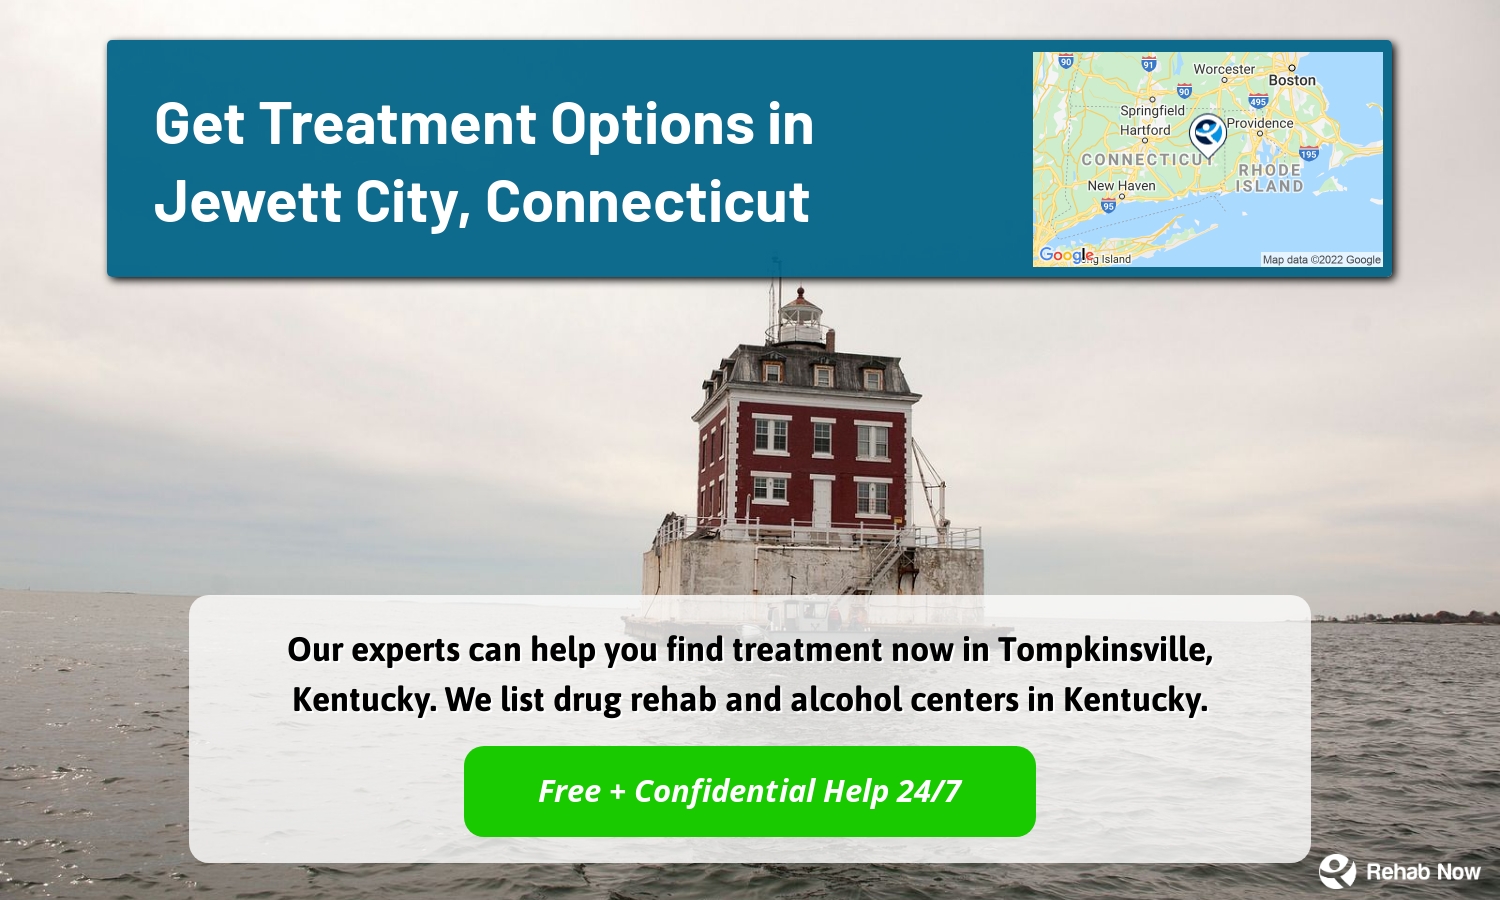 Our experts can help you find treatment now in Tompkinsville, Kentucky. We list drug rehab and alcohol centers in Kentucky.